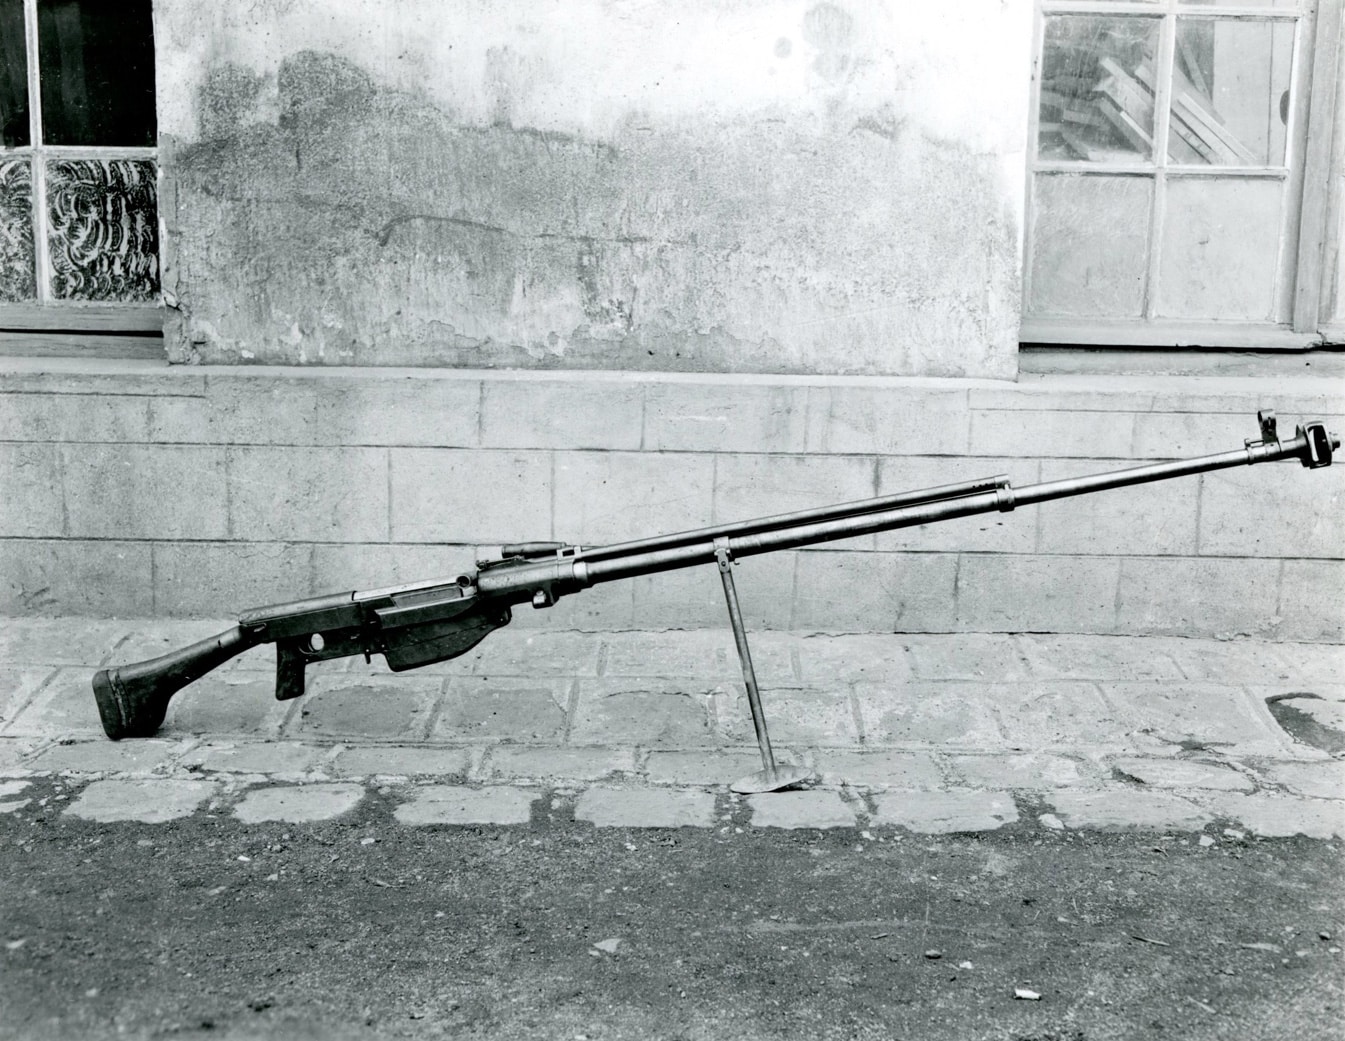 ptrs-41 captured in germany